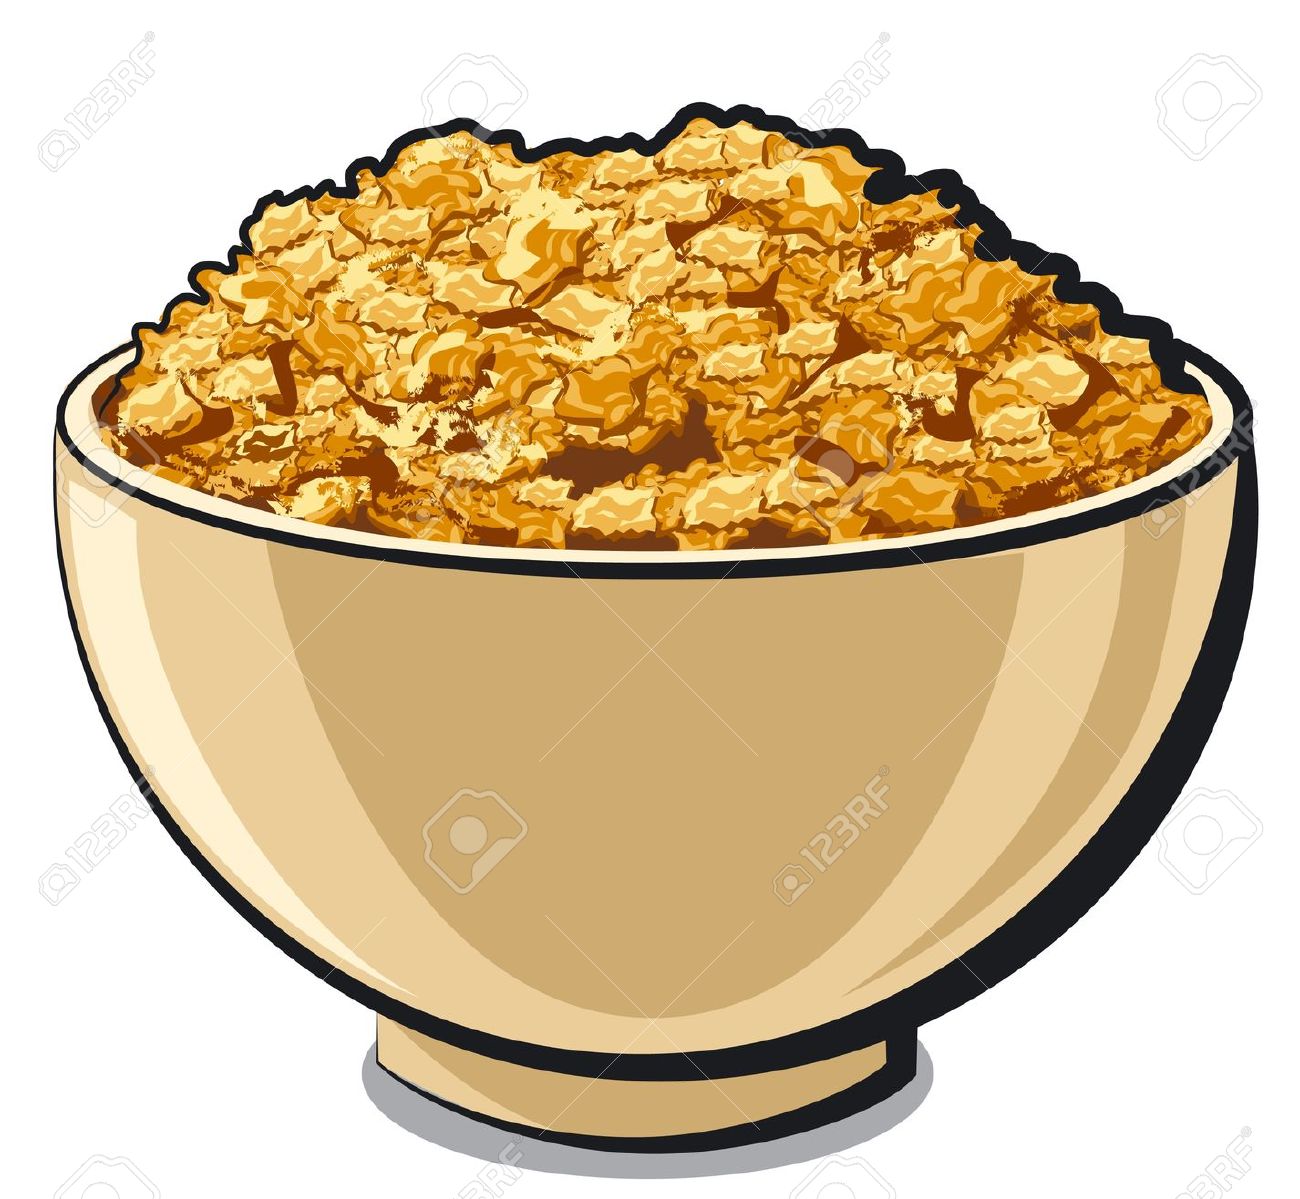 cereal bowl: tasty cornflakes .